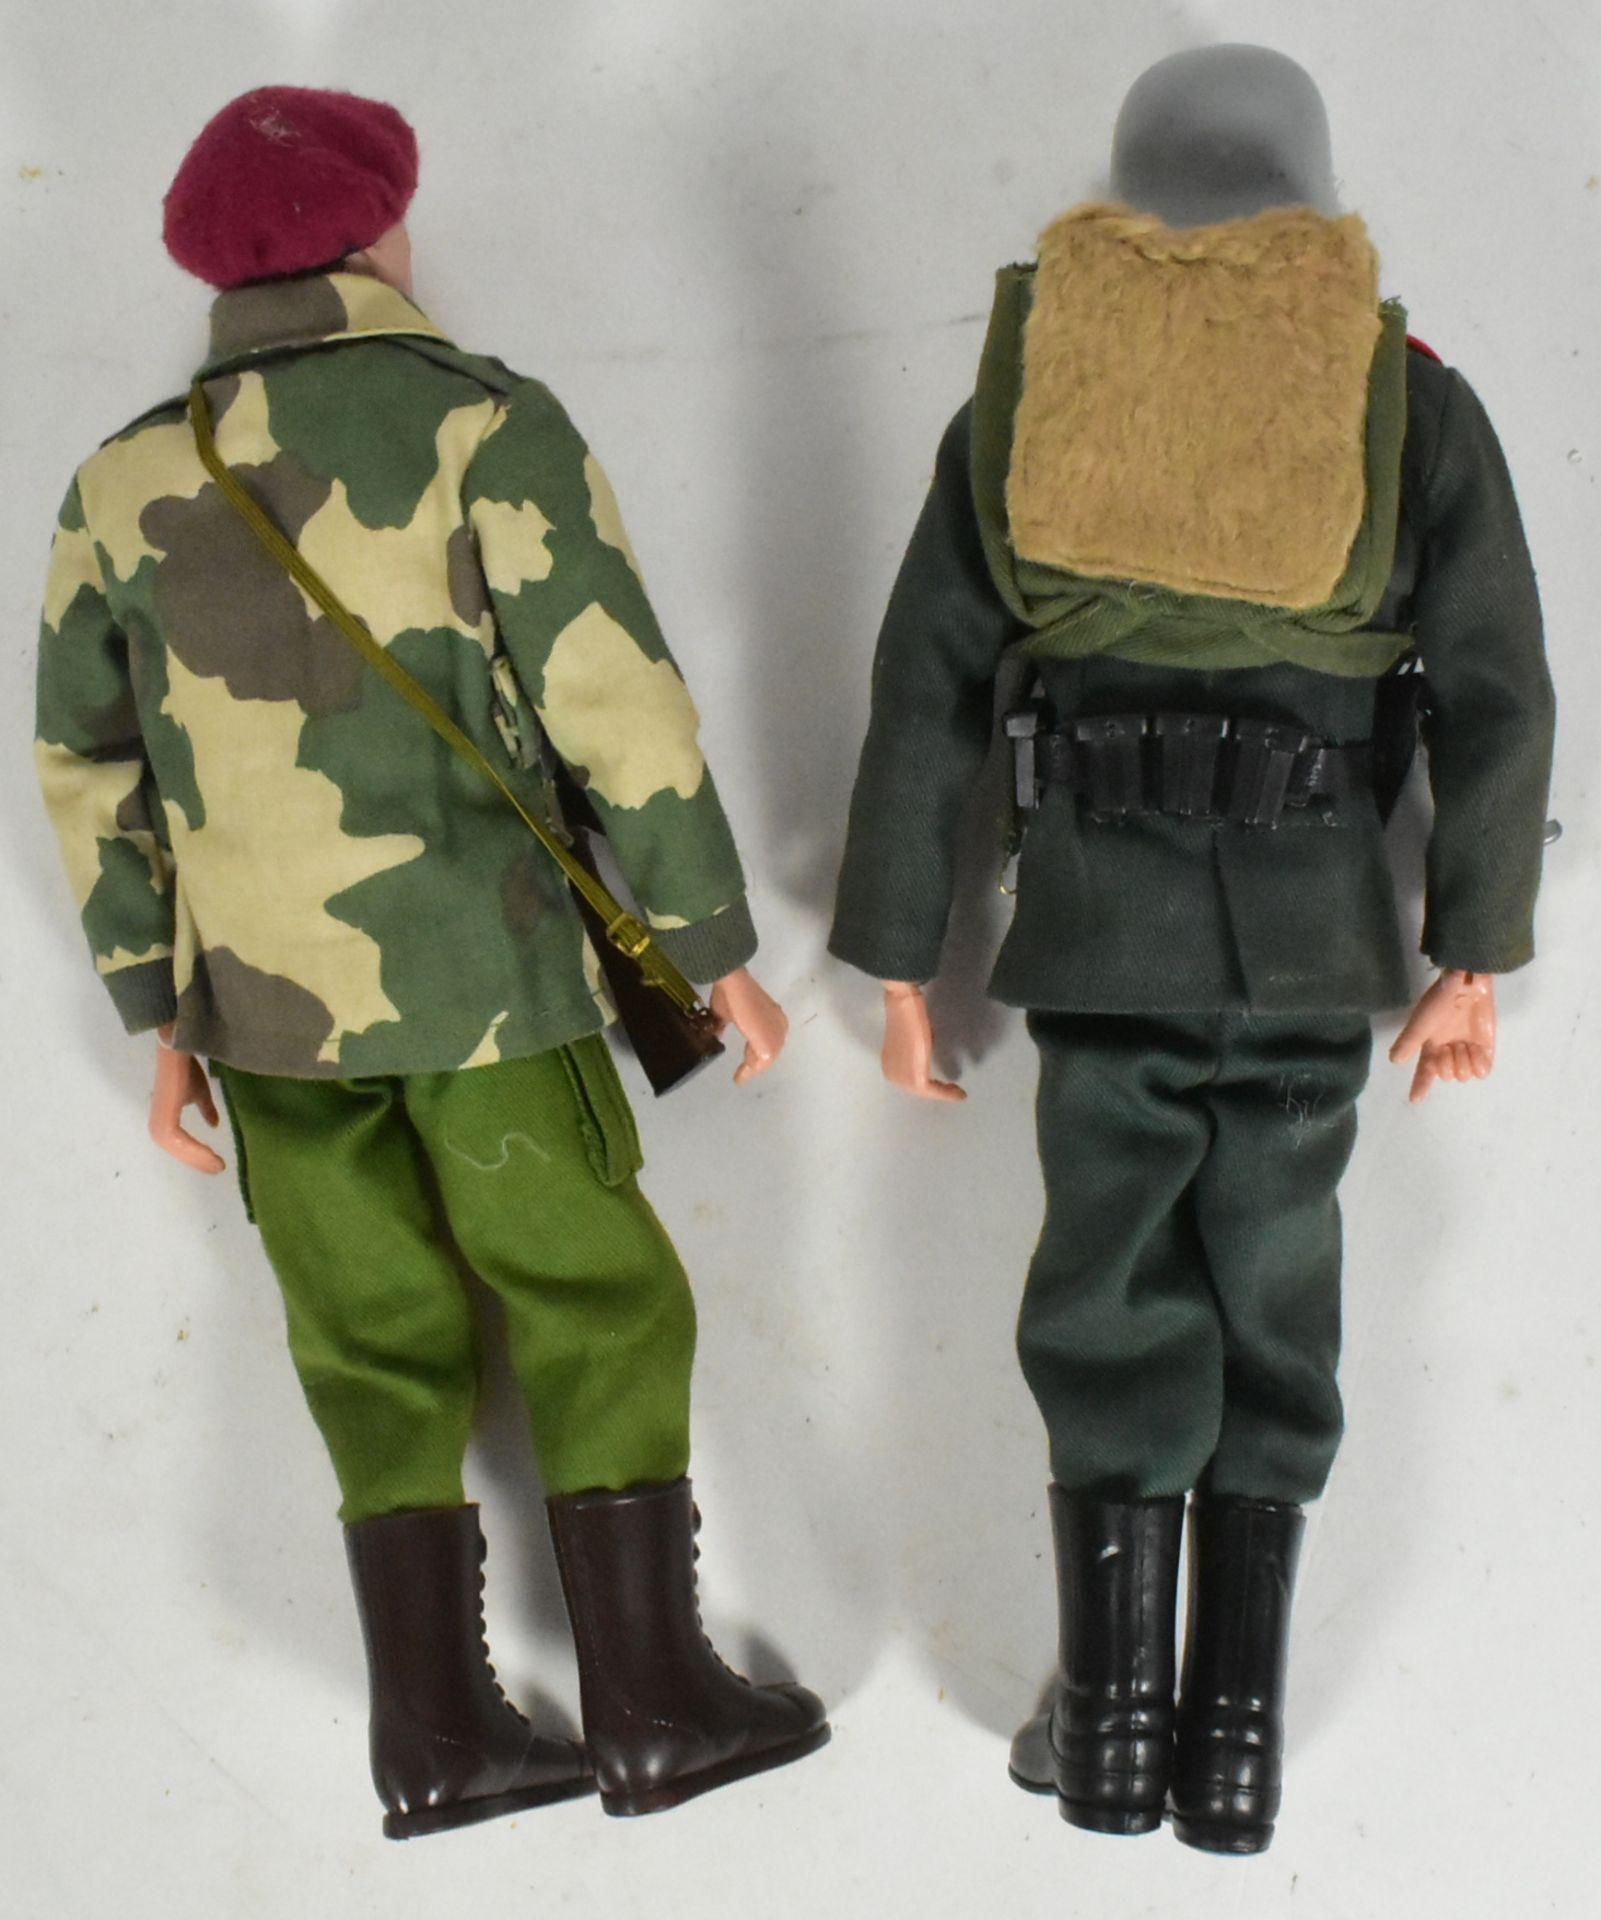 ACTION MAN - X2 VINTAGE PALITOY ACTION MAN FIGURES - Image 5 of 5